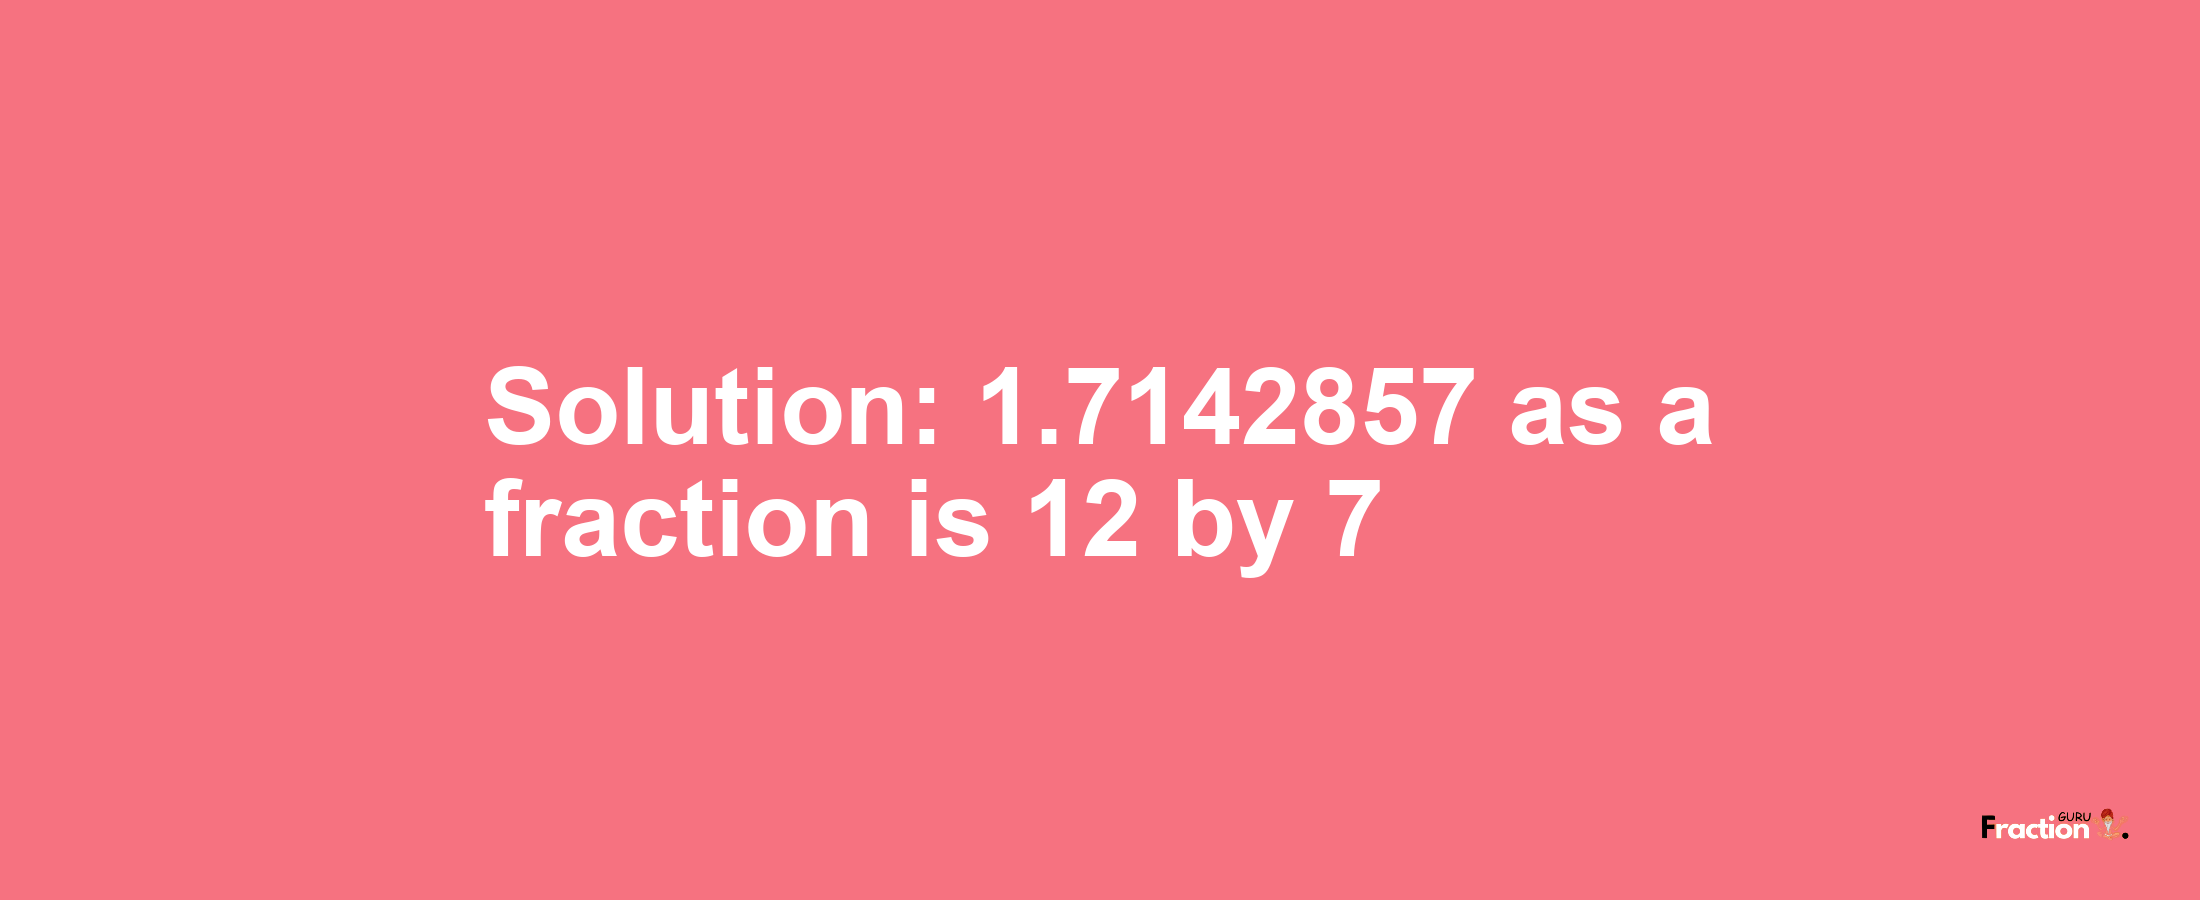 Solution:1.7142857 as a fraction is 12/7